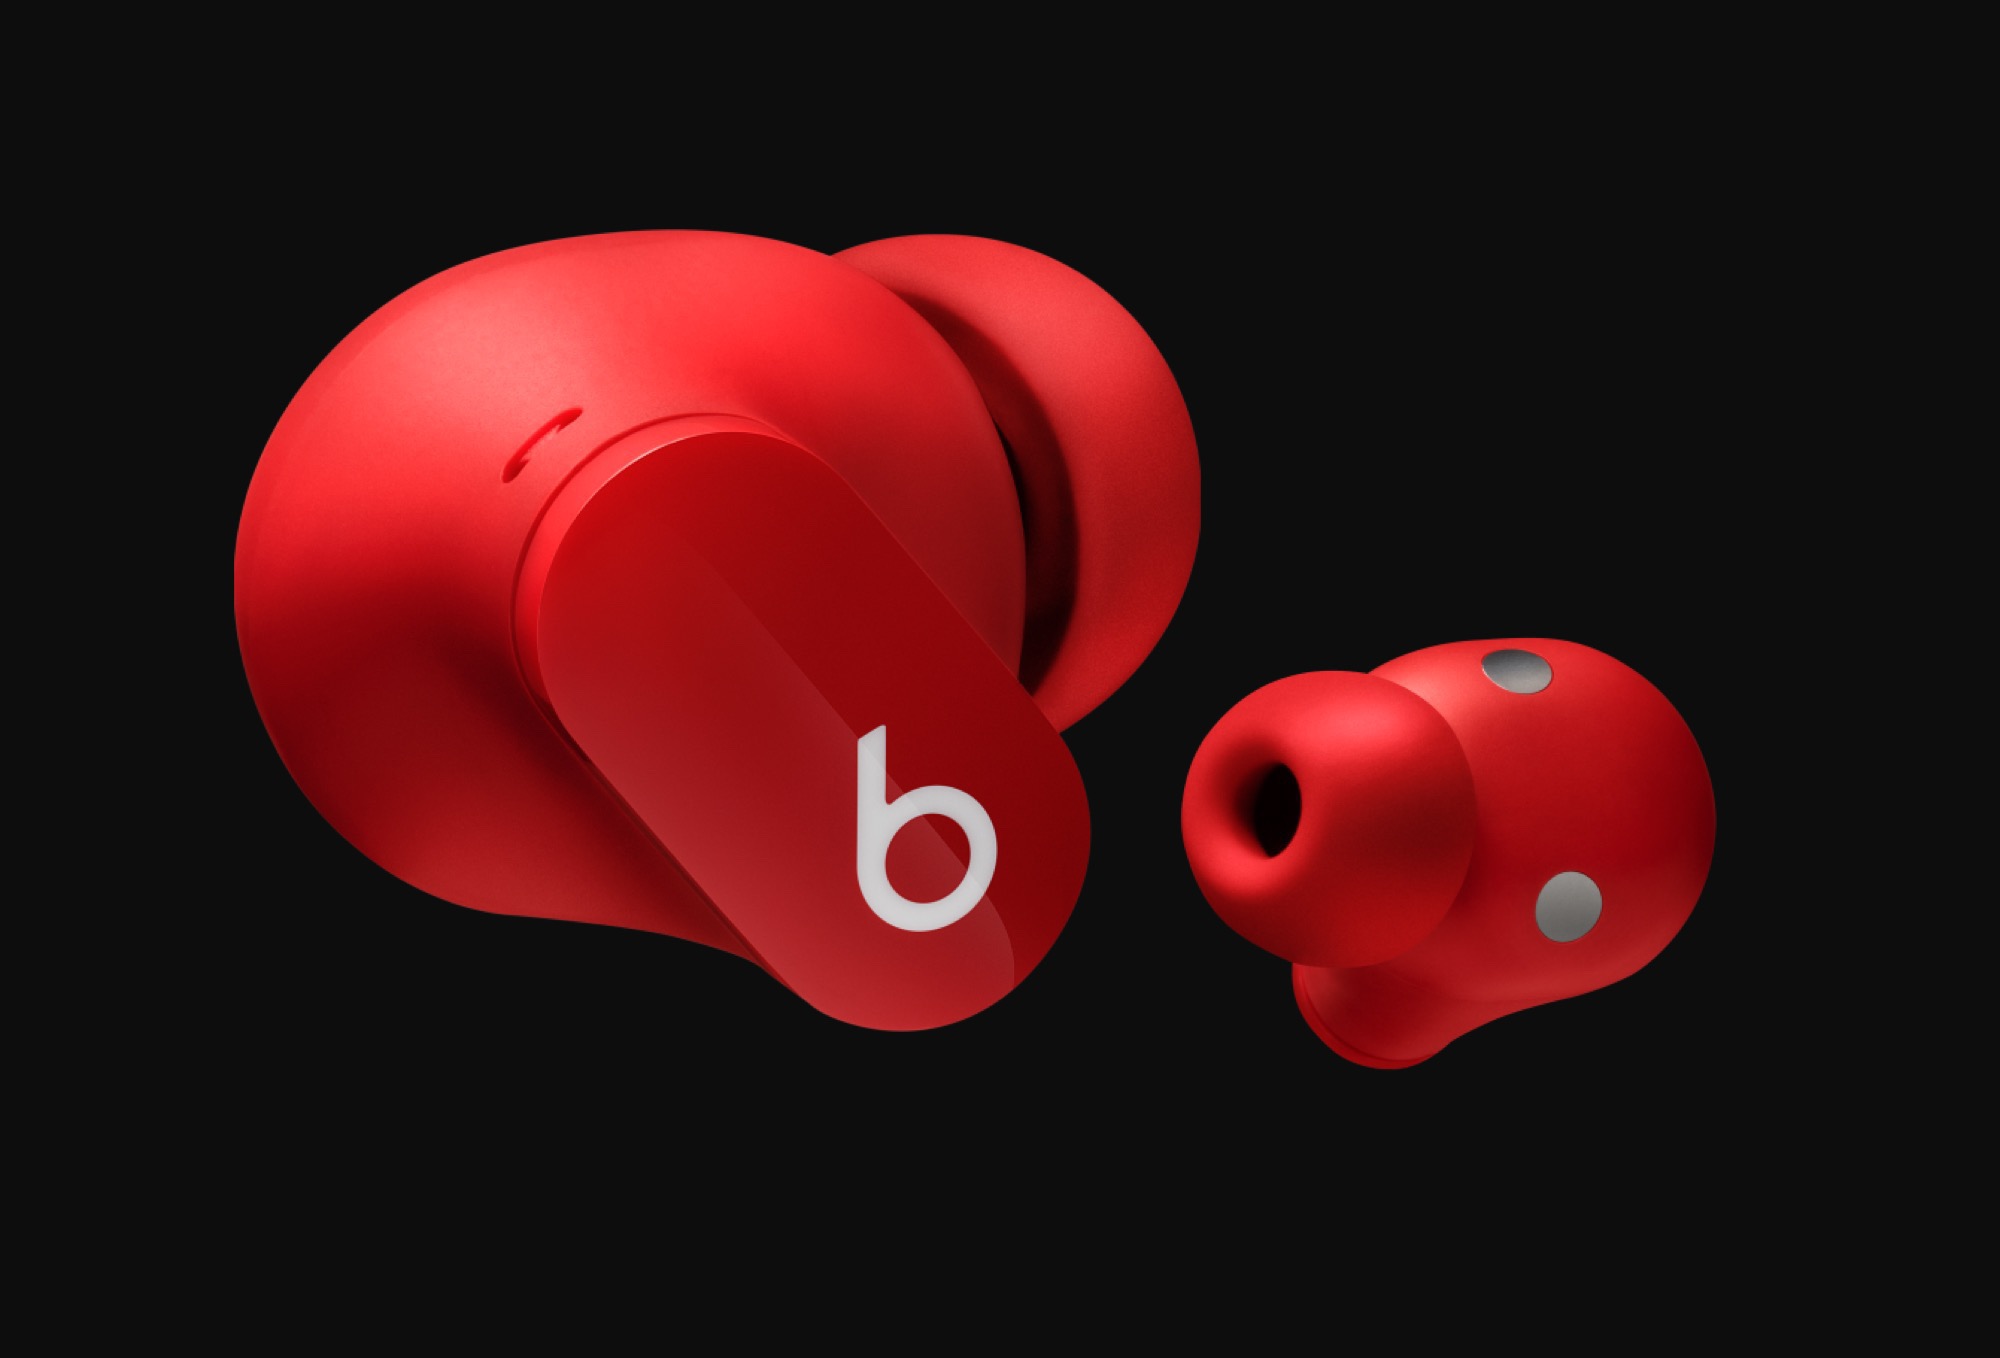 Beats Fit Pro Launch Worldwide With Similar Features as AirPods Pro -  MacRumors